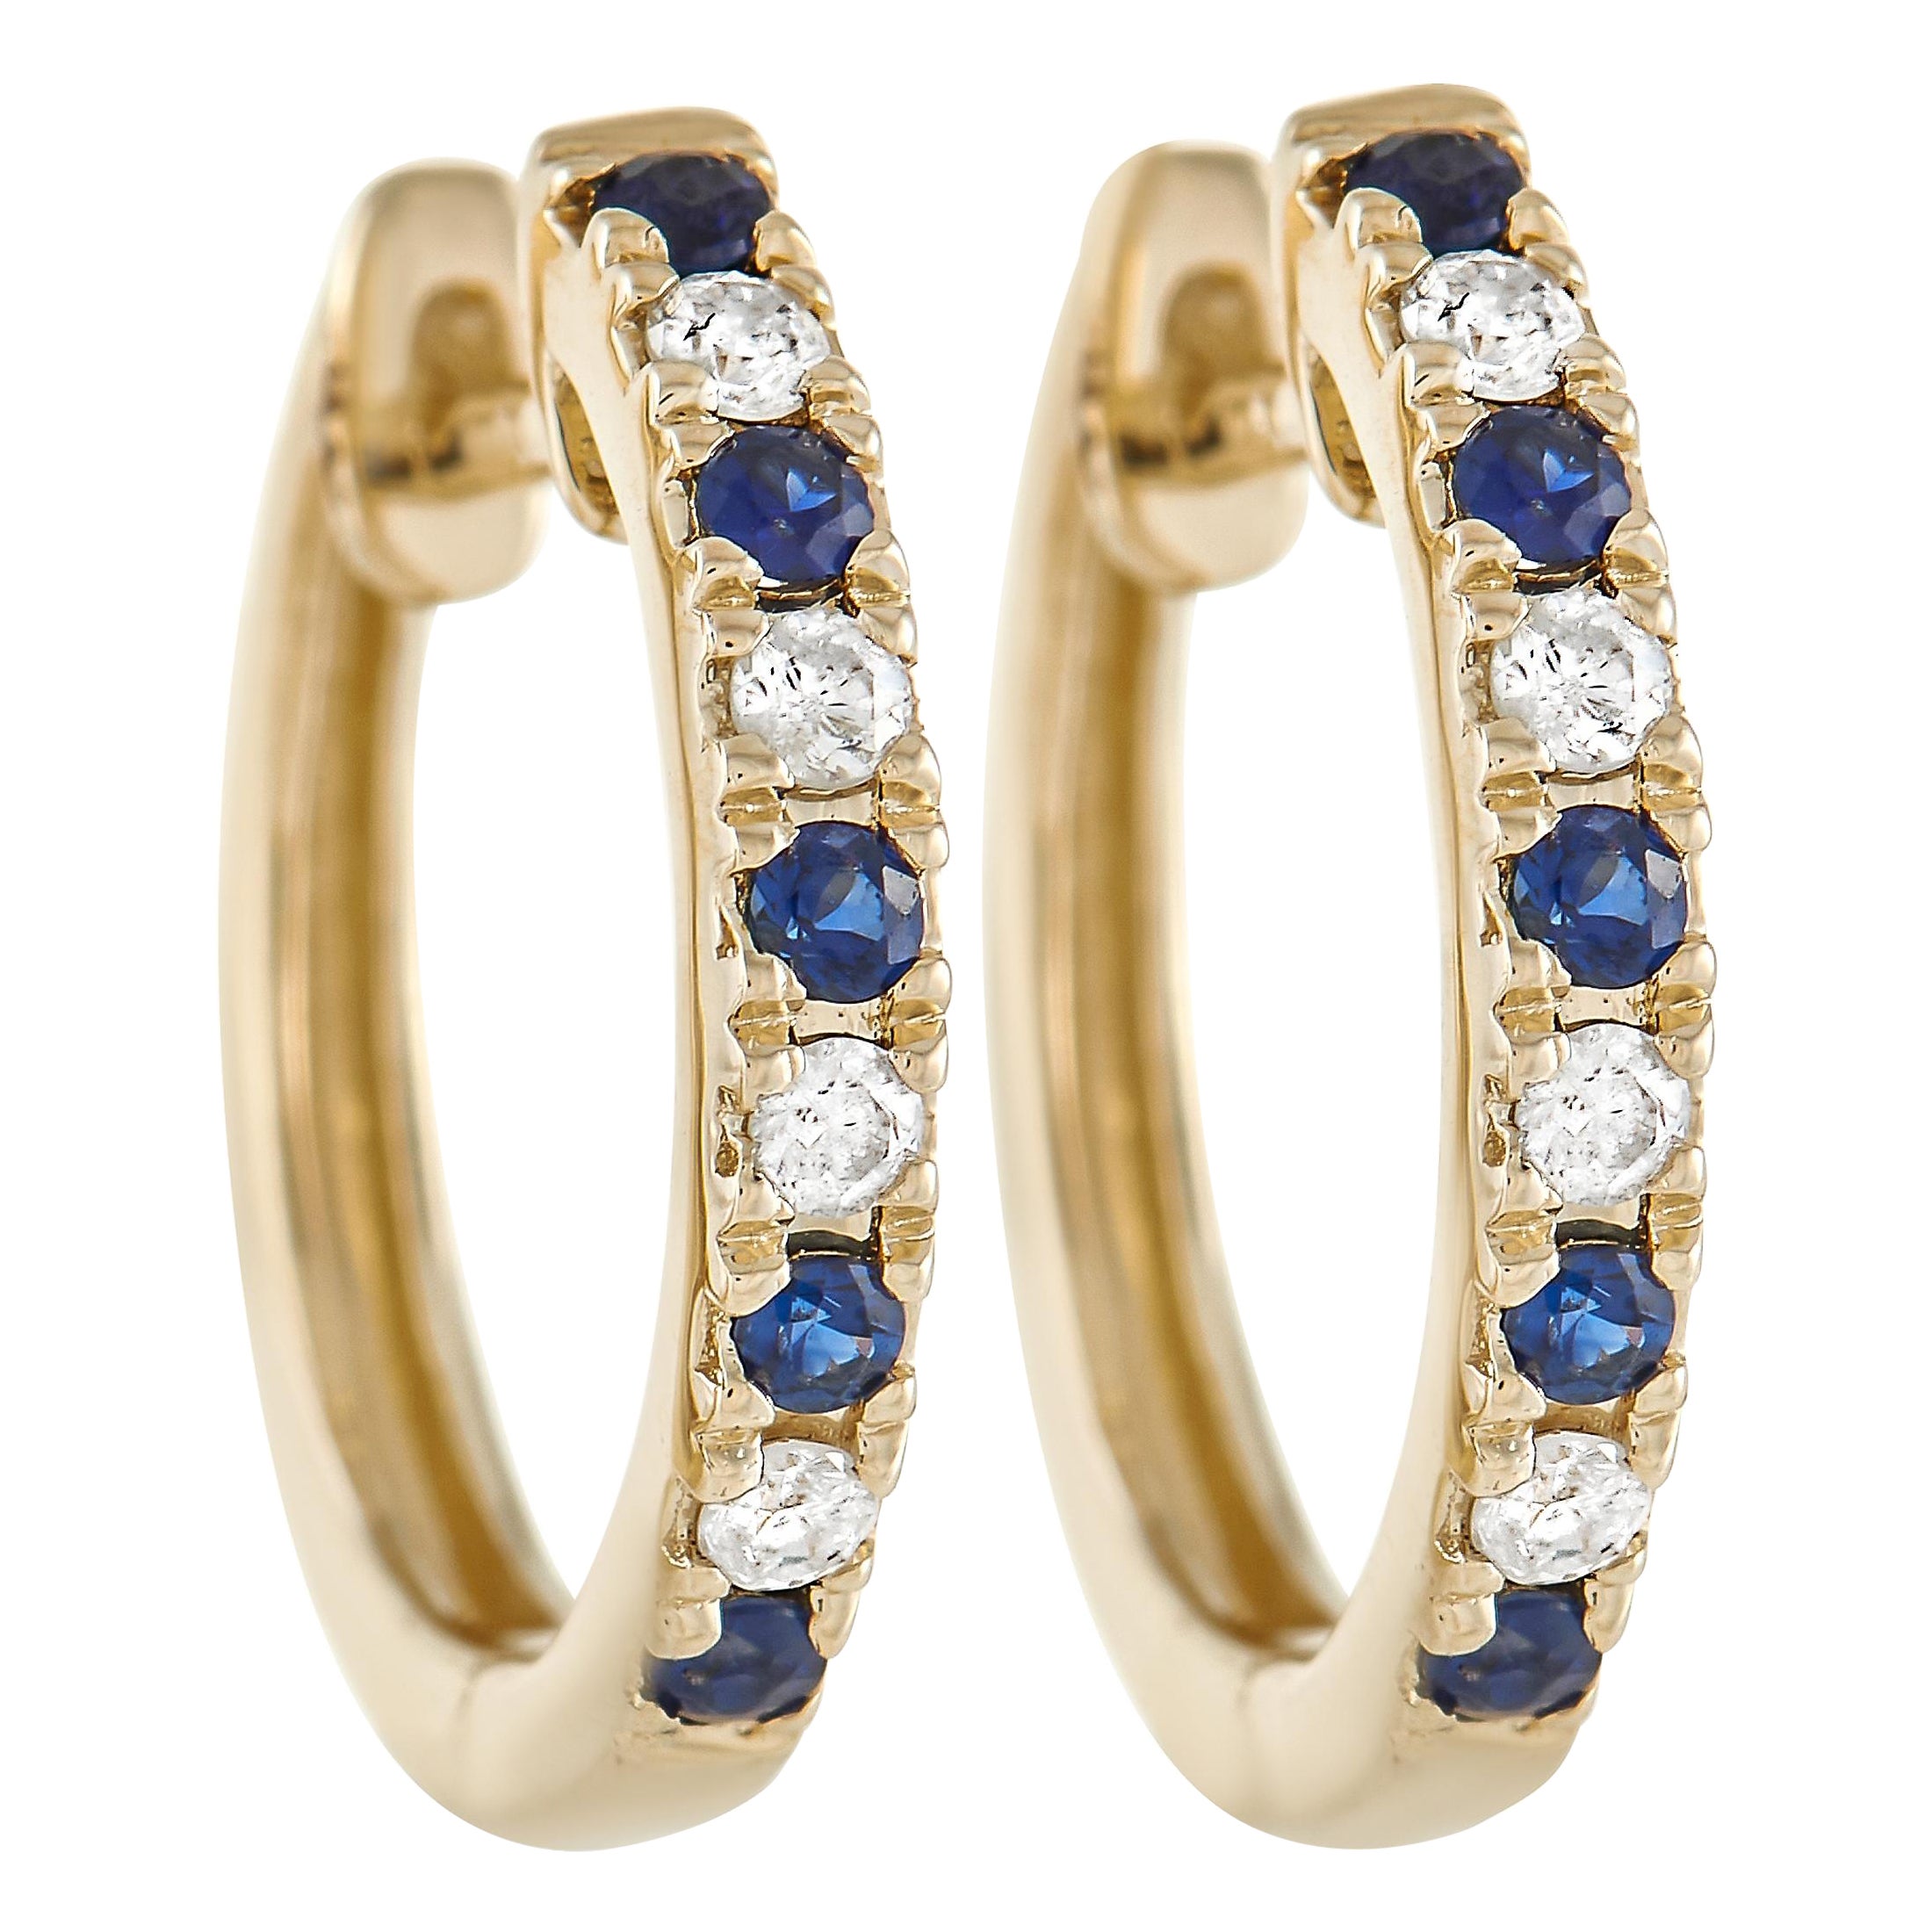 LB Exclusive 14K Yellow Gold 0.11 Ct Diamond and Sapphire Hoop Earrings